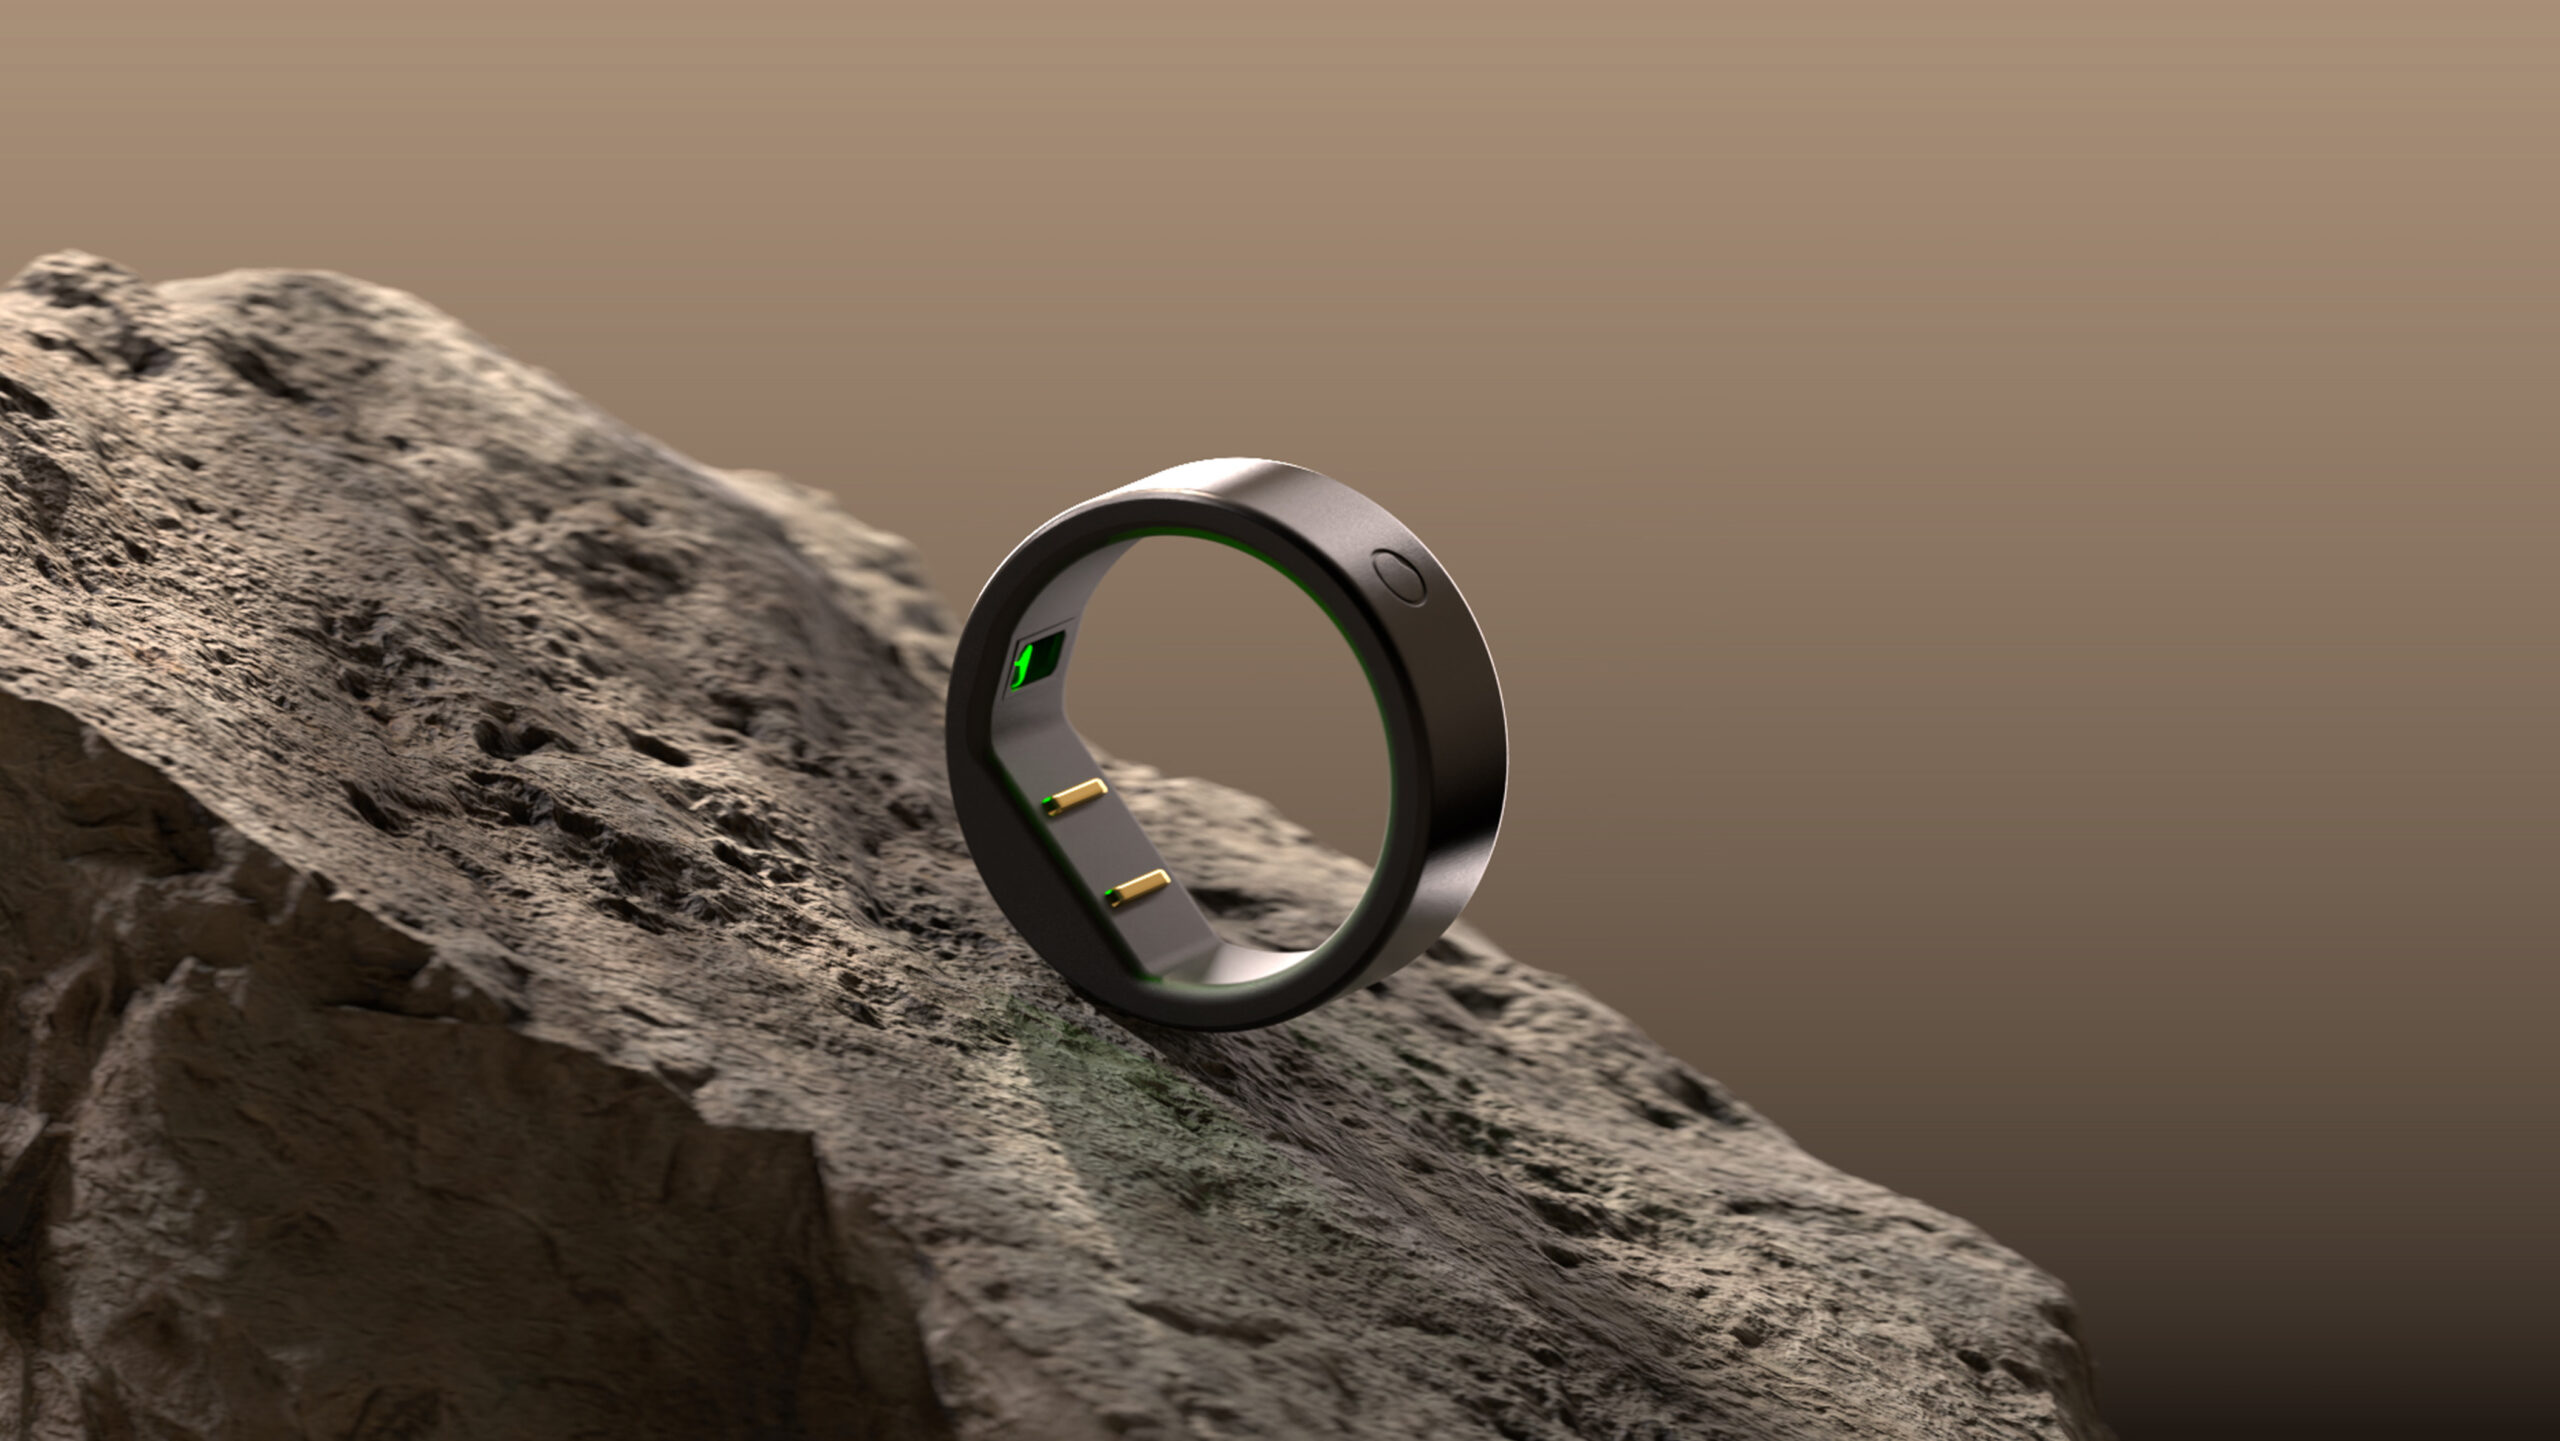 A Circular Ring Slim rests on a rock surface.